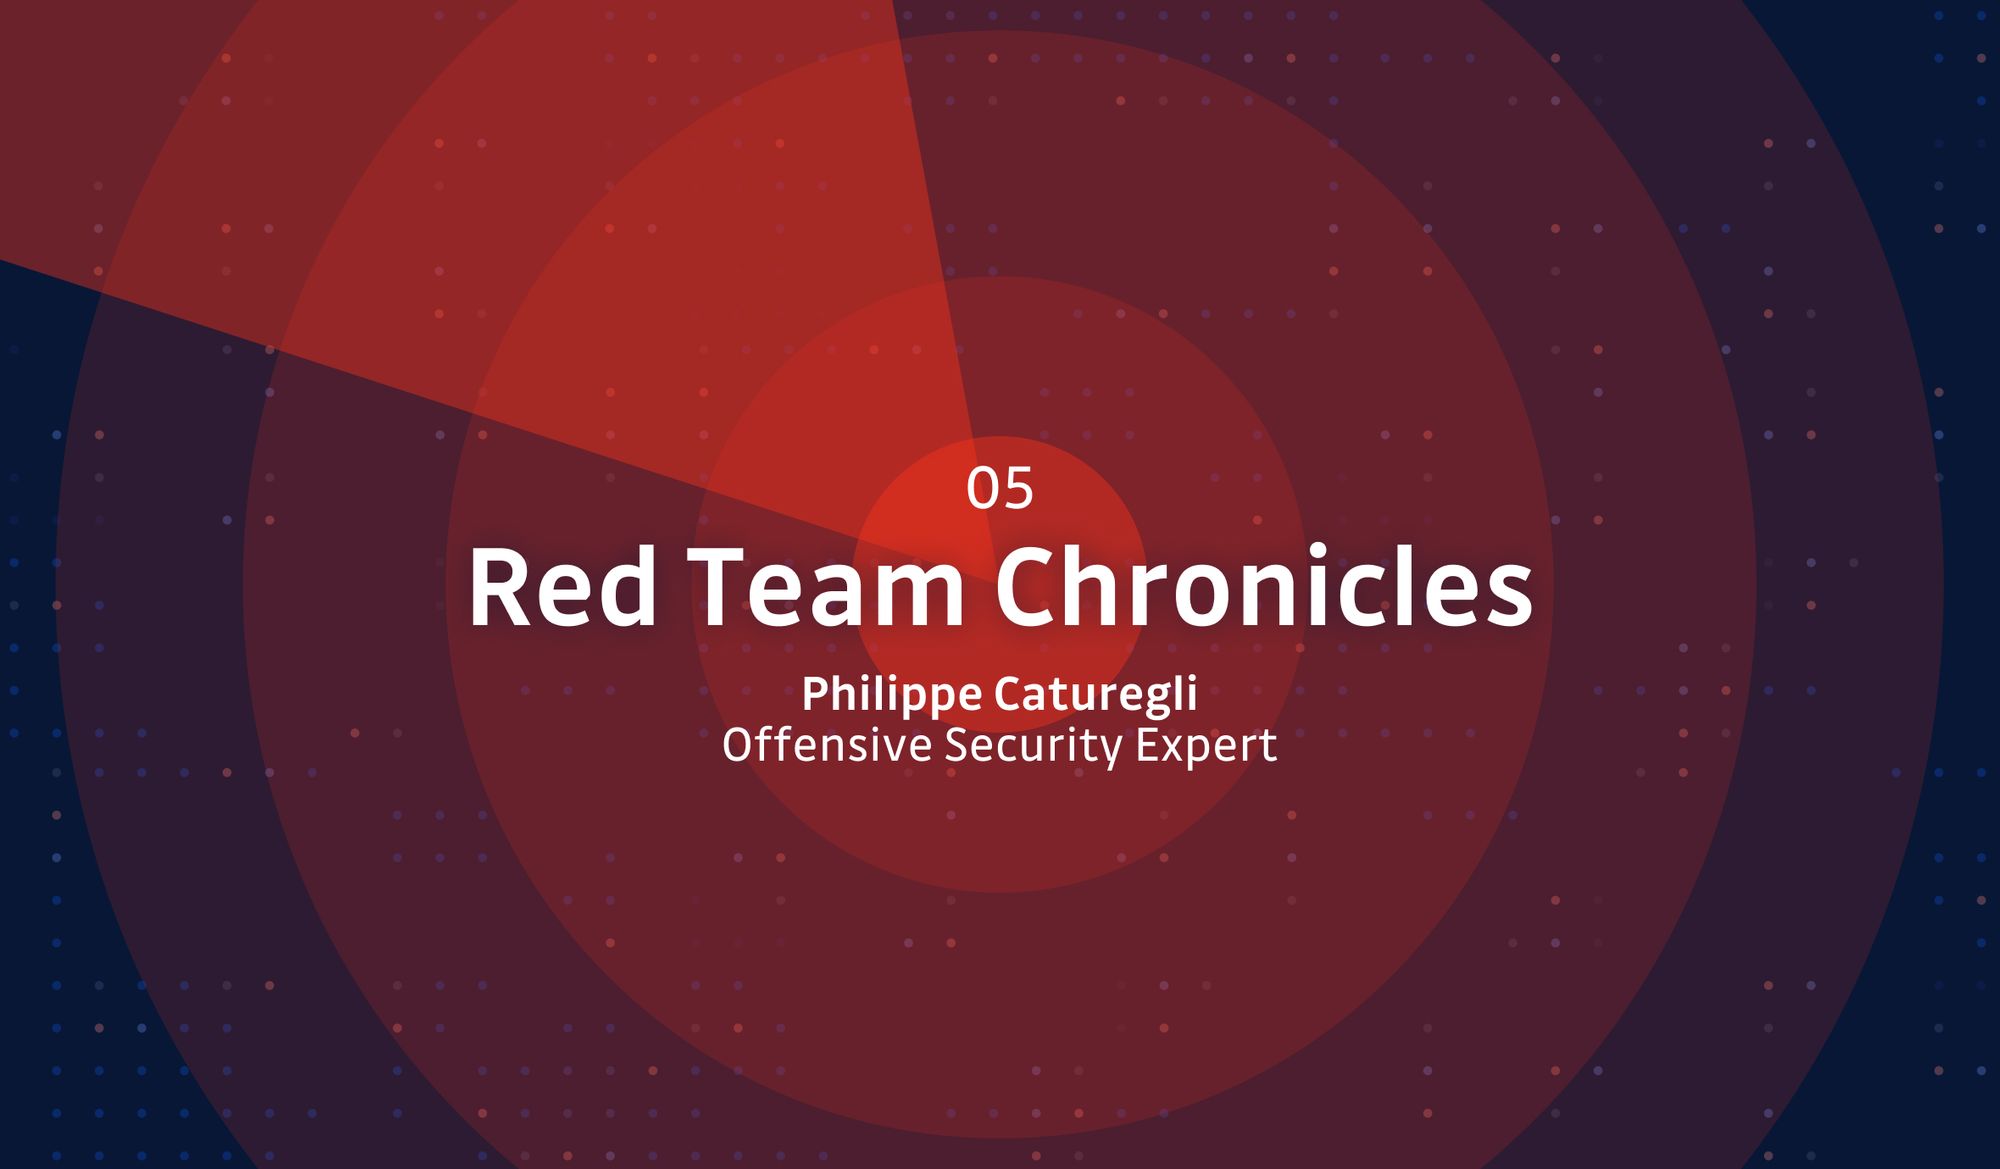 Red Team Chronicles Episode 5 - Alert to Avoid Serious Compromise